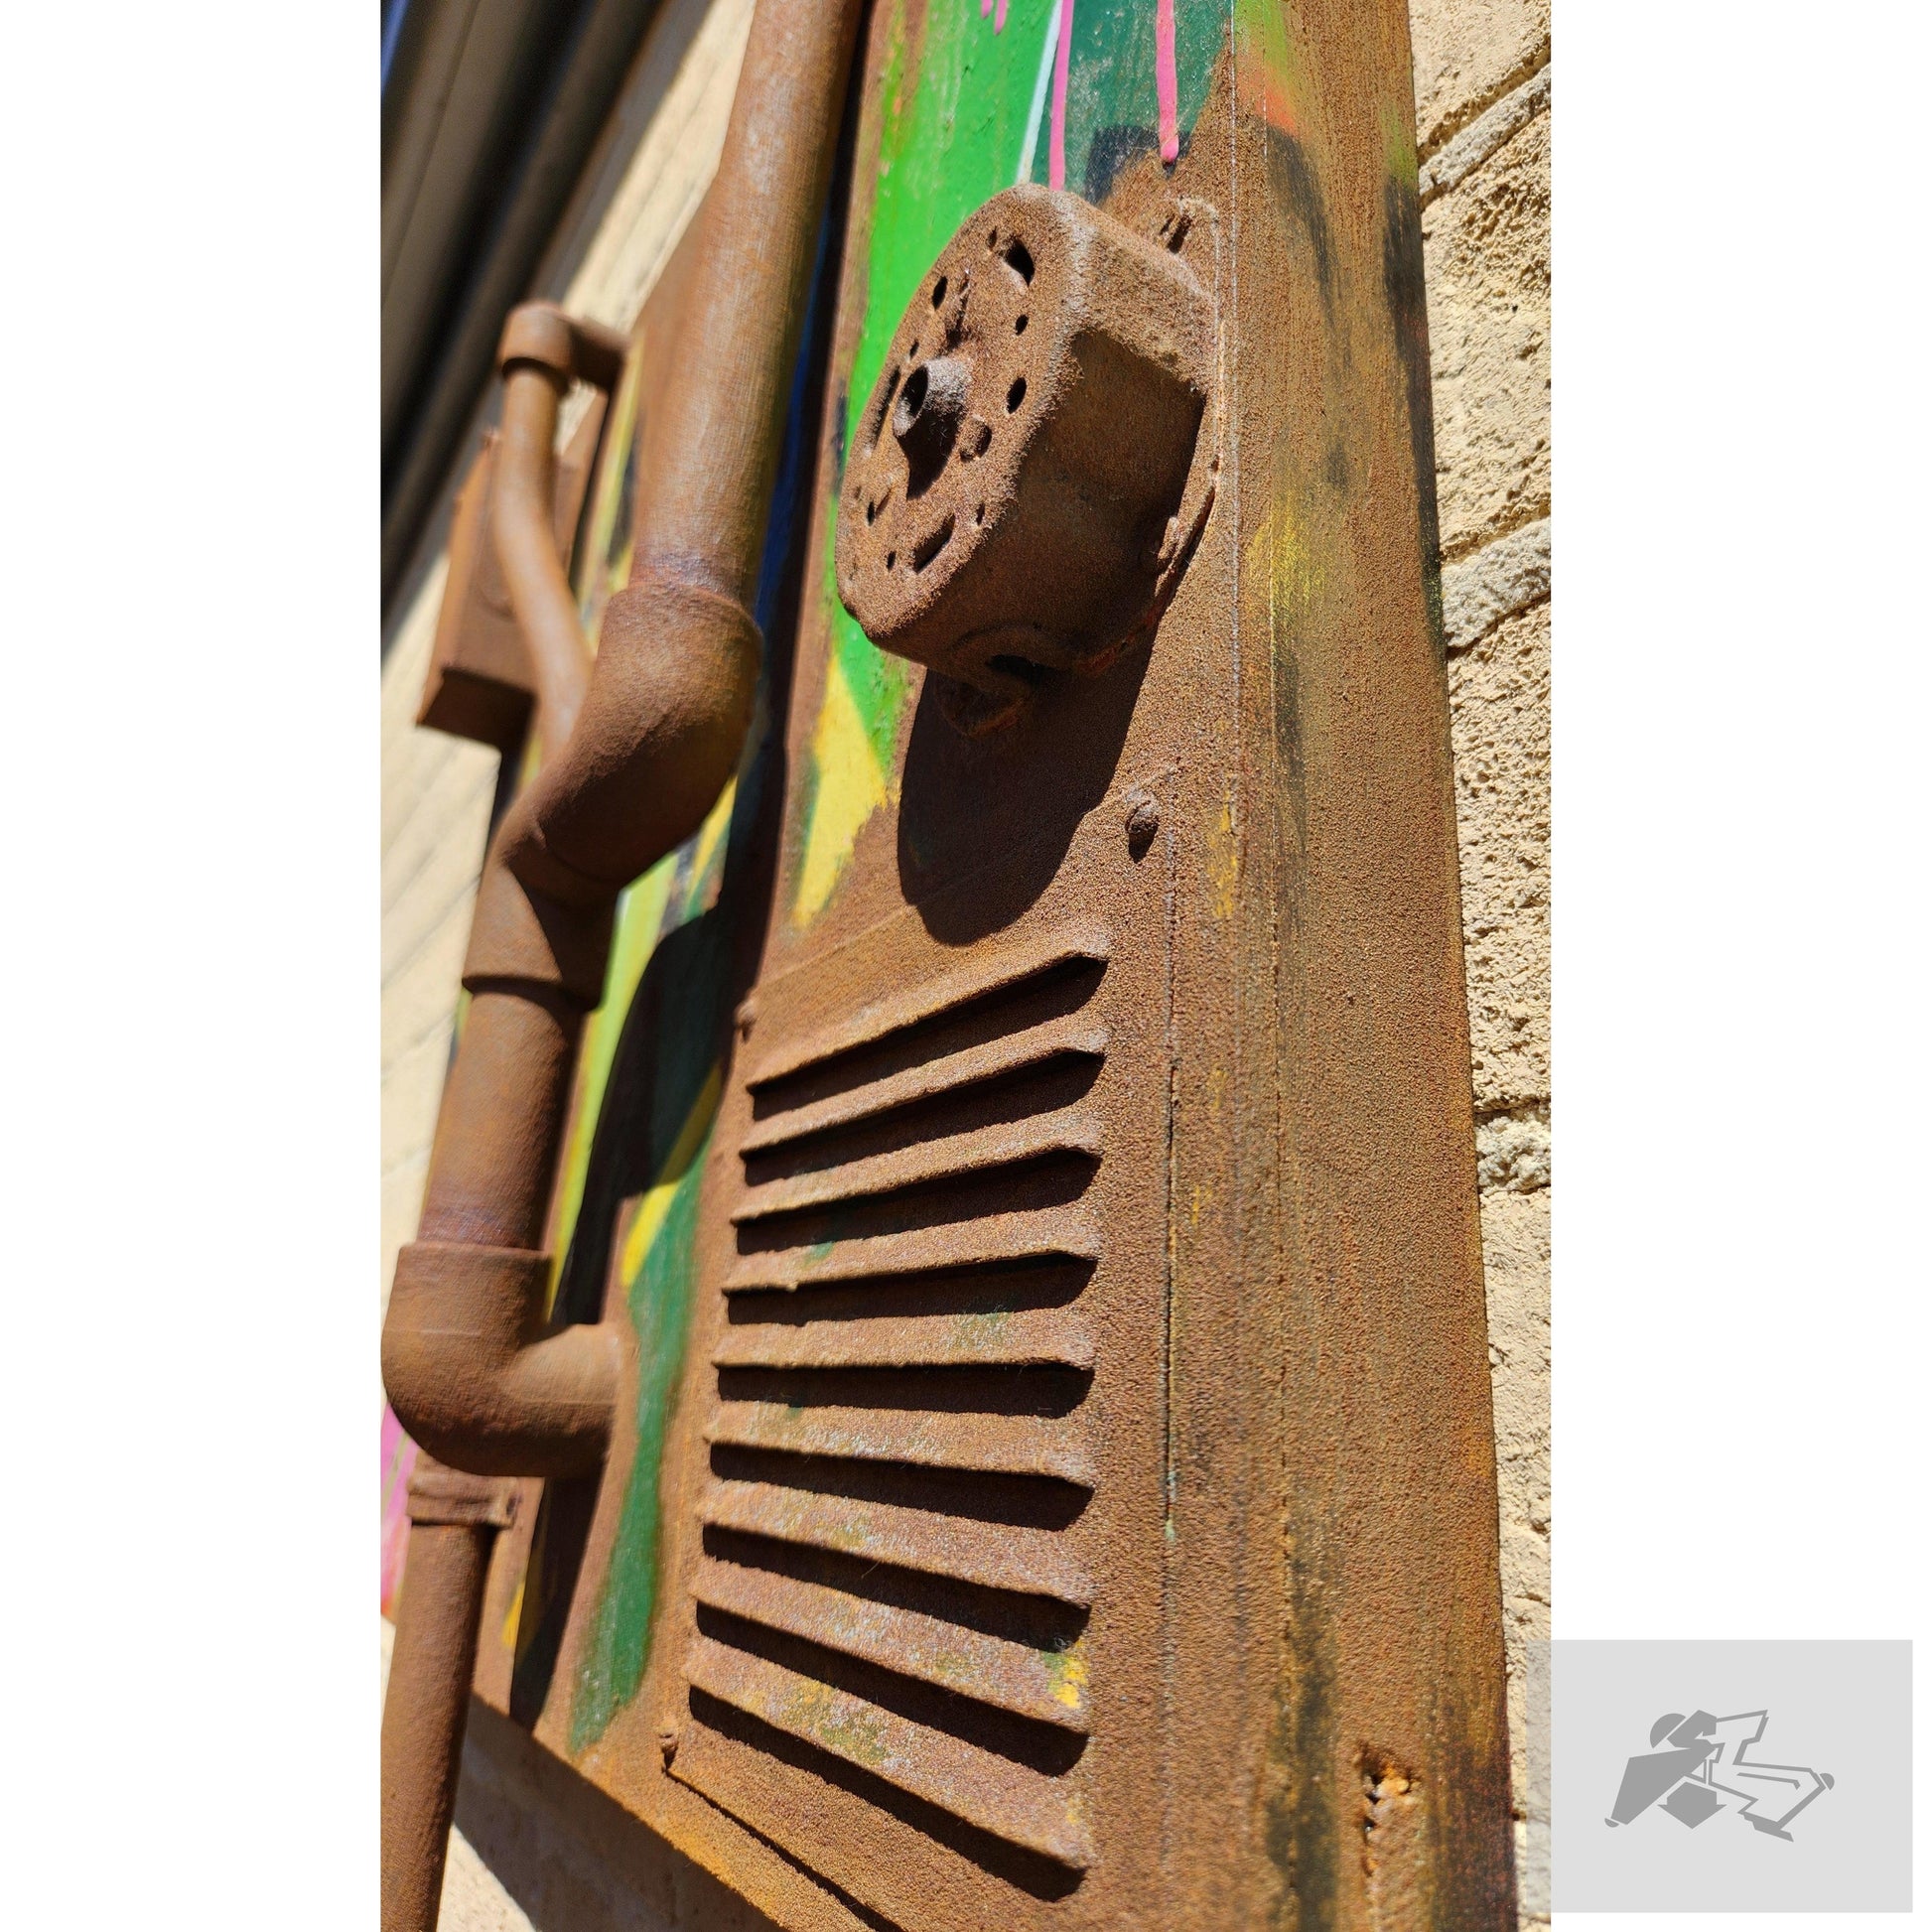 Rusted pipes with green graffiti art canvas-Silence Melbourne